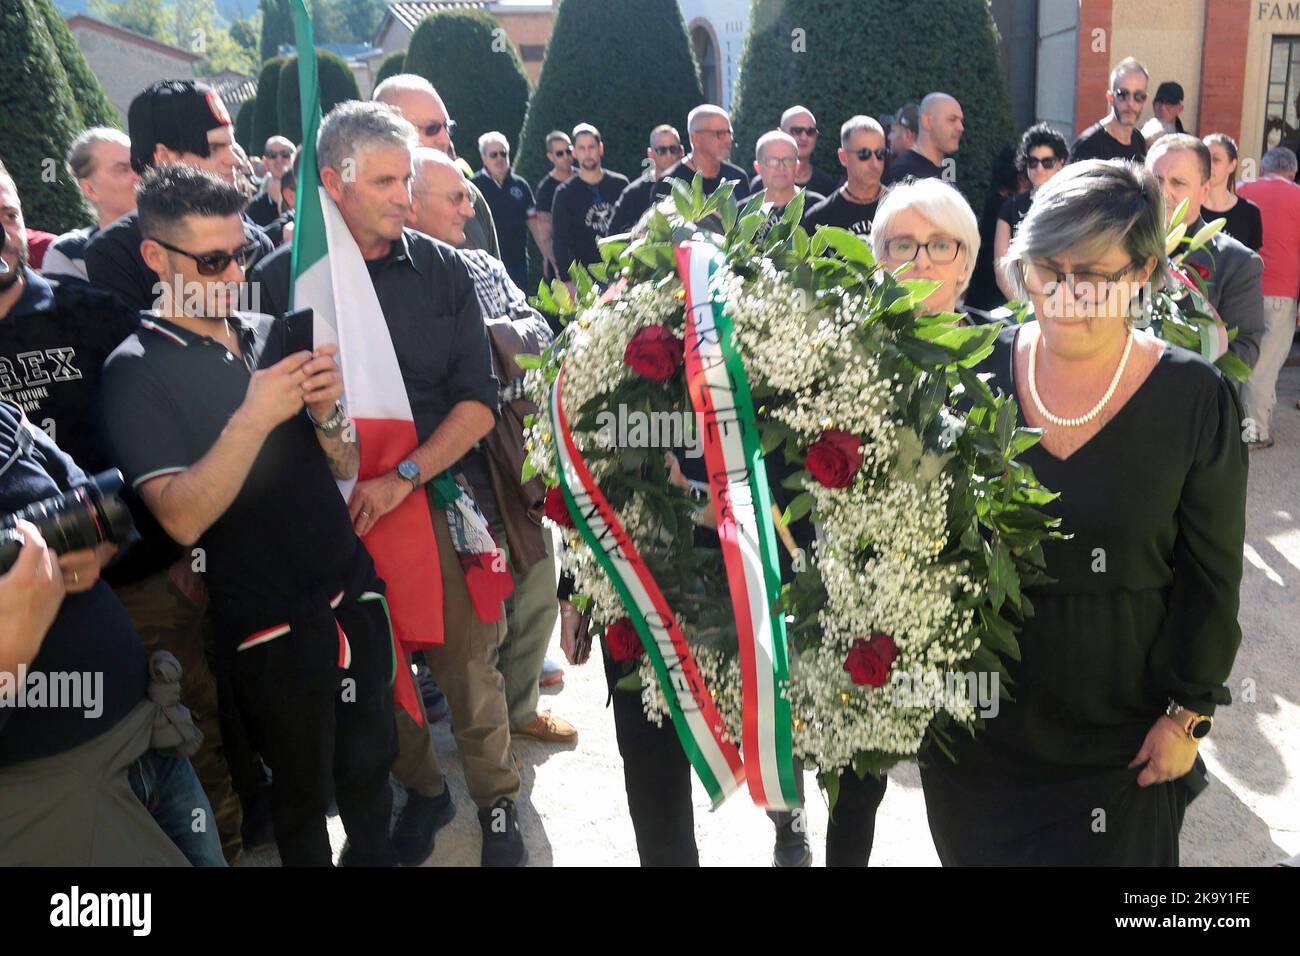 100th anniversary of the march of the fascists on Rome, commemoration ceremony organized by the Arditi of the Ravenna section. In the photo Orsola and Vittoria Mussolini, nephews of Benito Mussolini, carry a wreath of flowers inside the family crypt. Editorial Usage Only Stock Photo